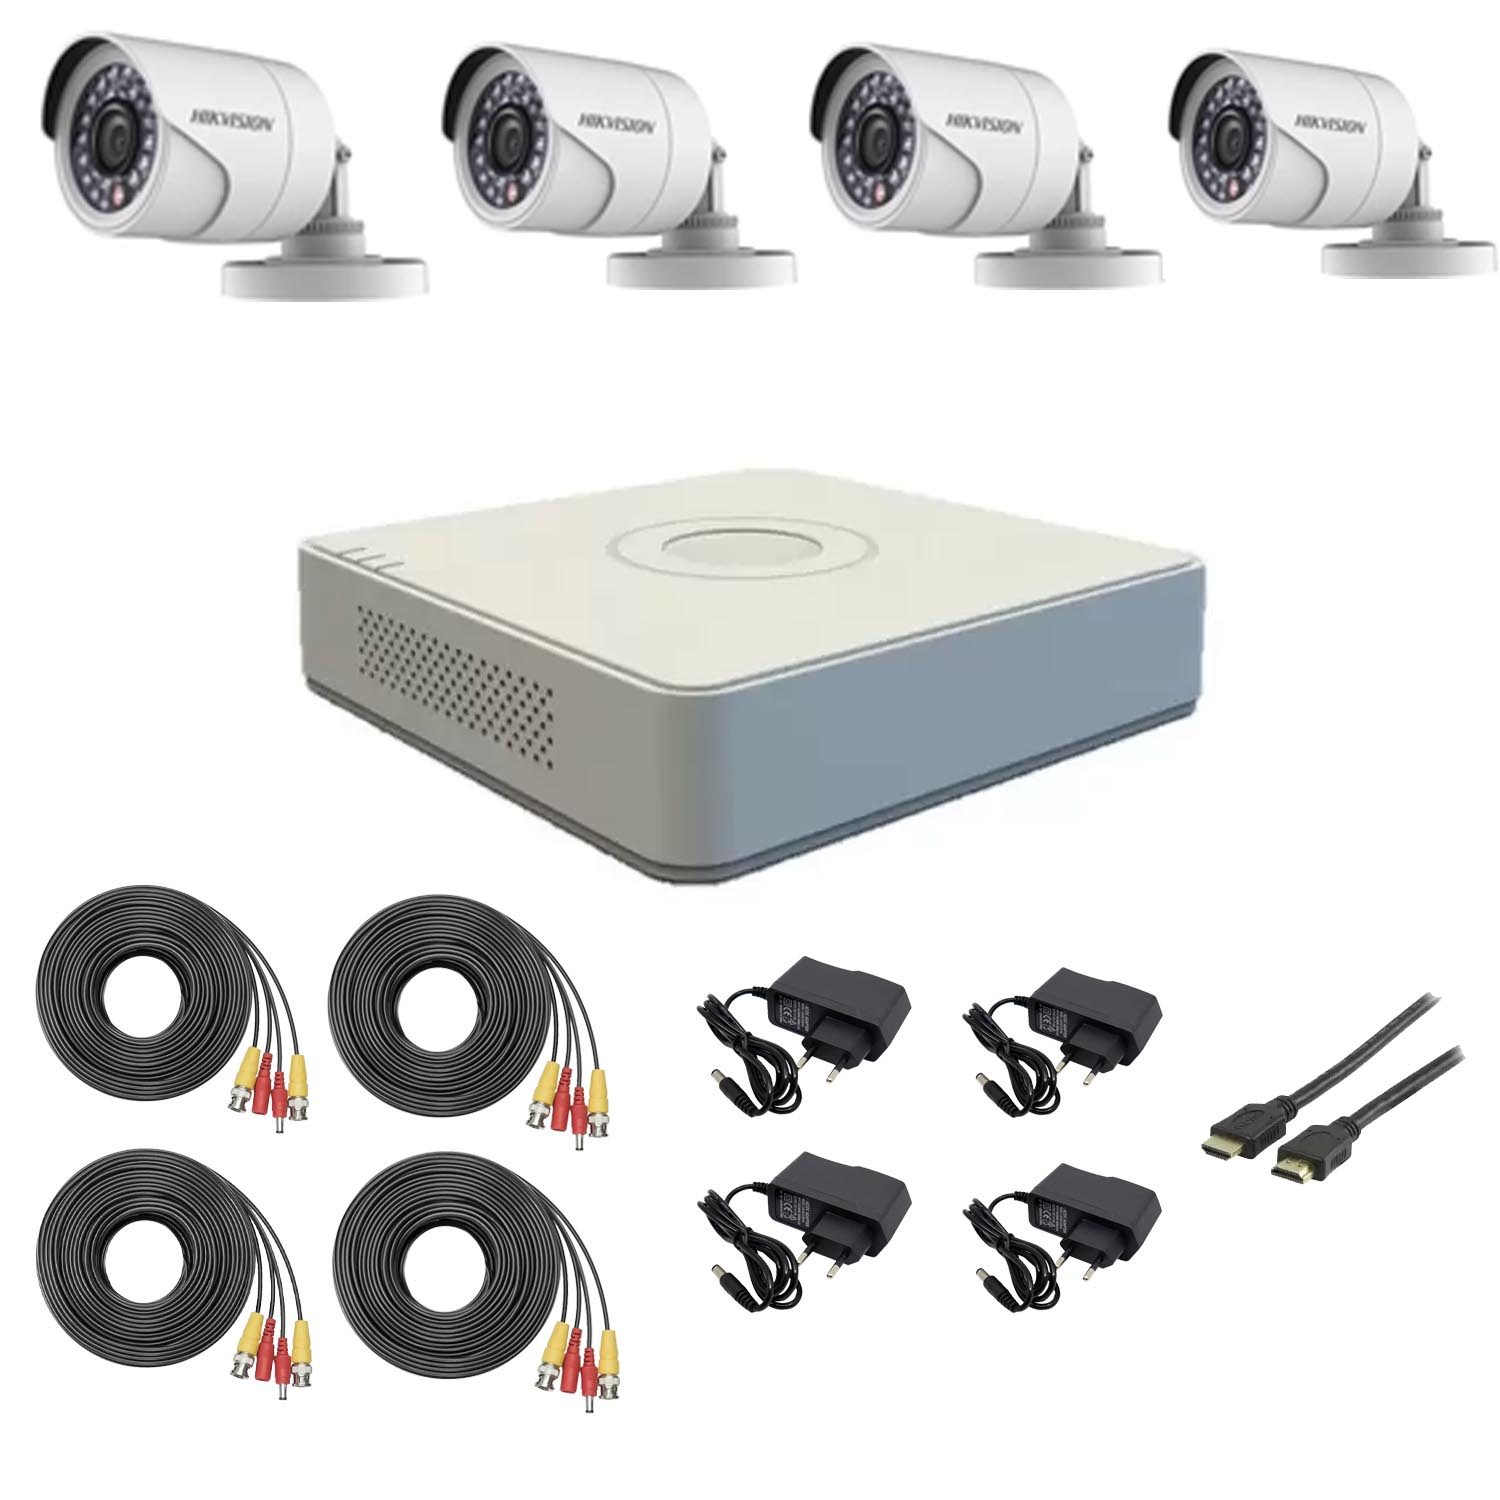 poultry cling Onlooker Kit supraveghere video 4 camere Hikvision exterior 20m IR, accesorii  incluse, soft telefon mobil , CABLU HDMI CADOU - Rovision - Camere  Supraveghere, Sisteme Alarma, Video Interfoane